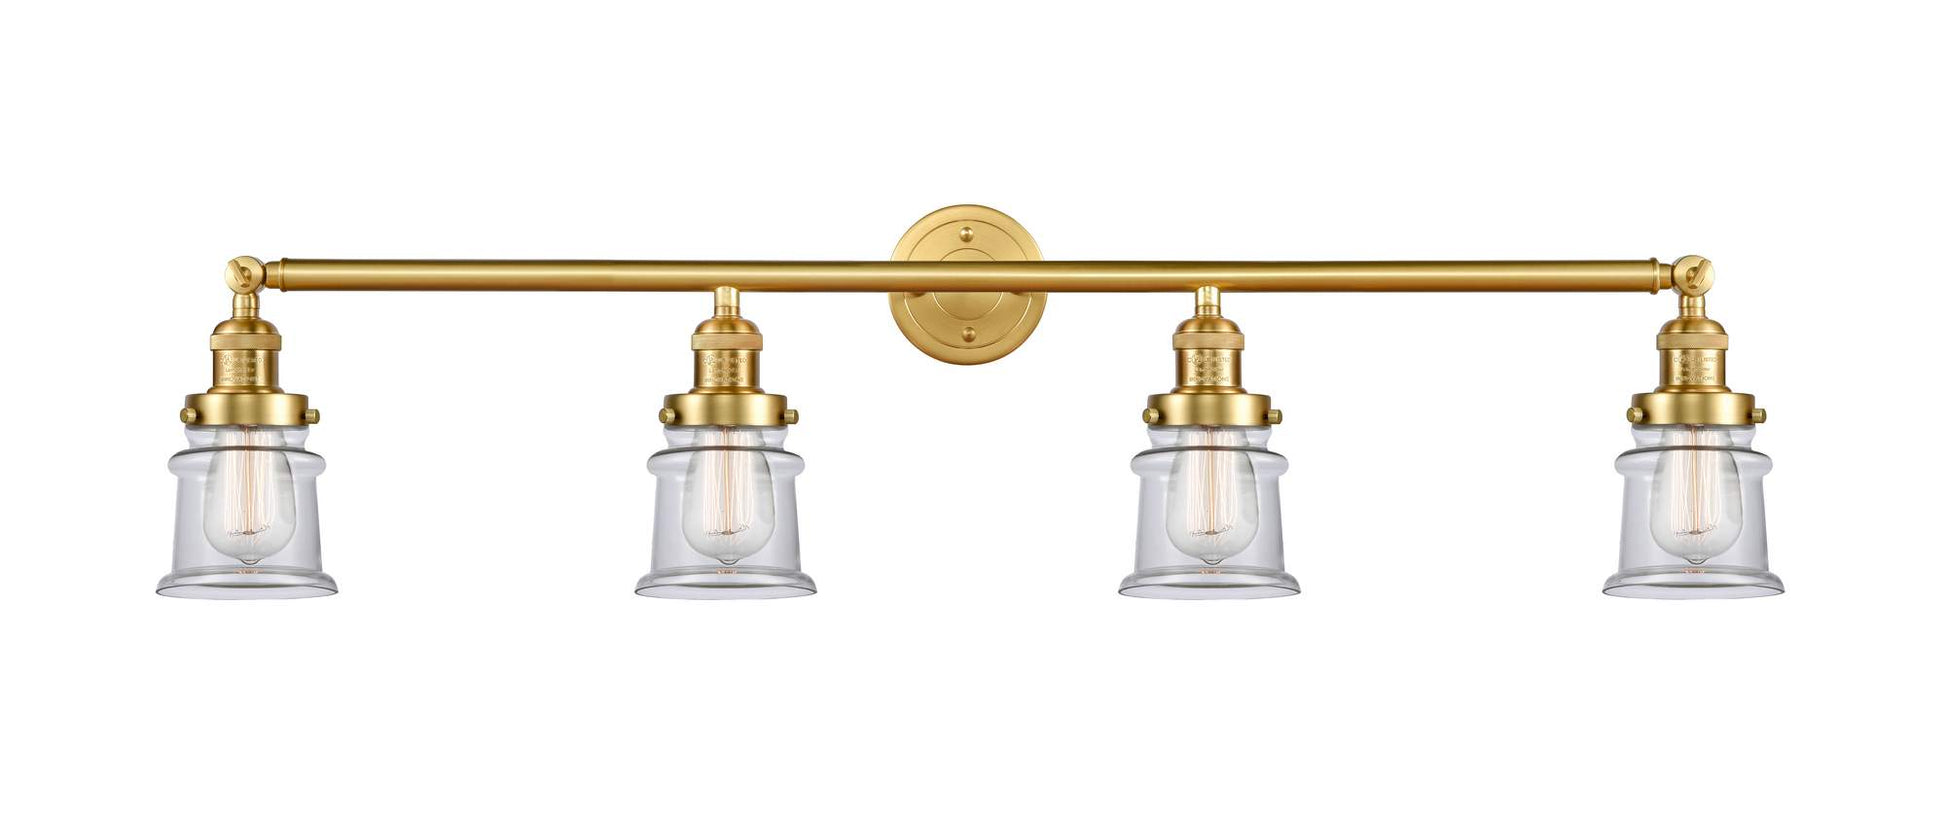 215-SG-G182S 4-Light 42" Satin Gold Bath Vanity Light - Clear Small Canton Glass - LED Bulb - Dimmensions: 42 x 7.5 x 11.25 - Glass Up or Down: Yes